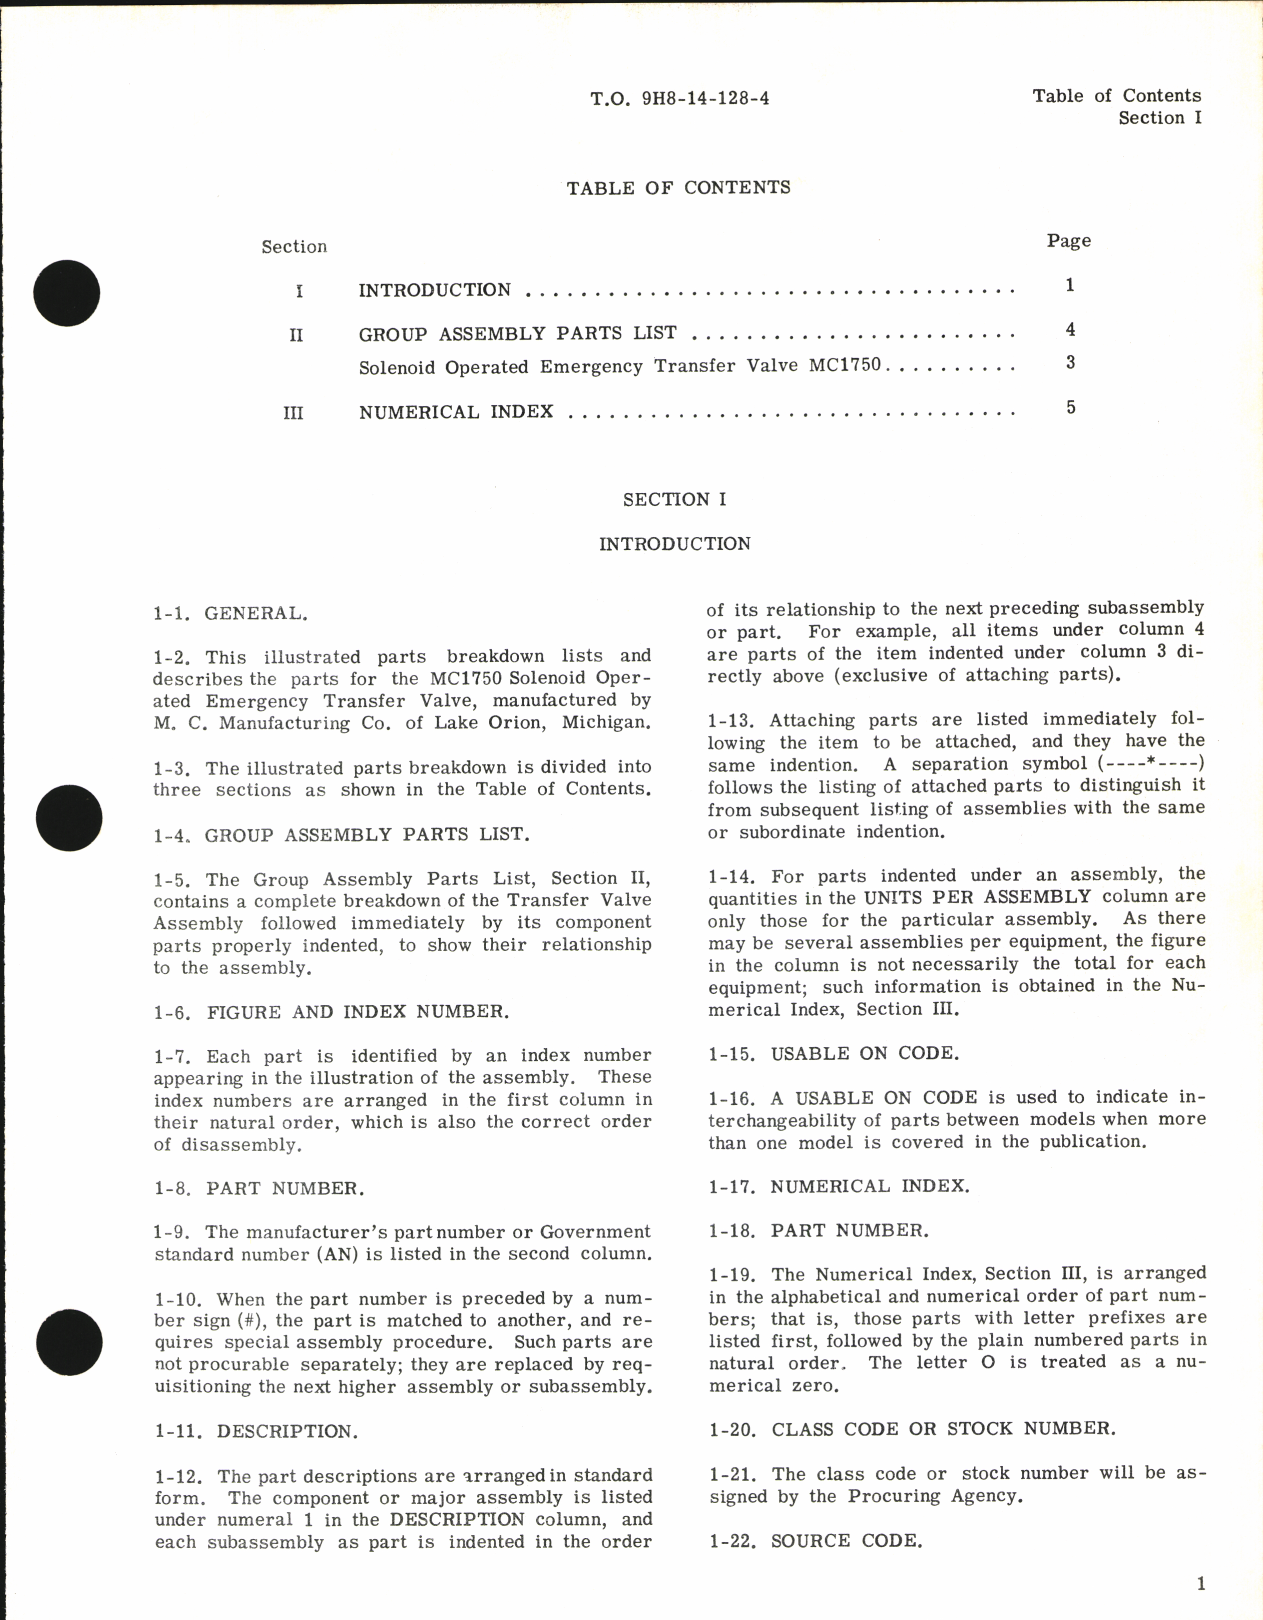 Sample page 3 from AirCorps Library document: Illustrated Parts Breakdown for Solenoid Operated Emergency Transfer Valve Part no. MC 1750